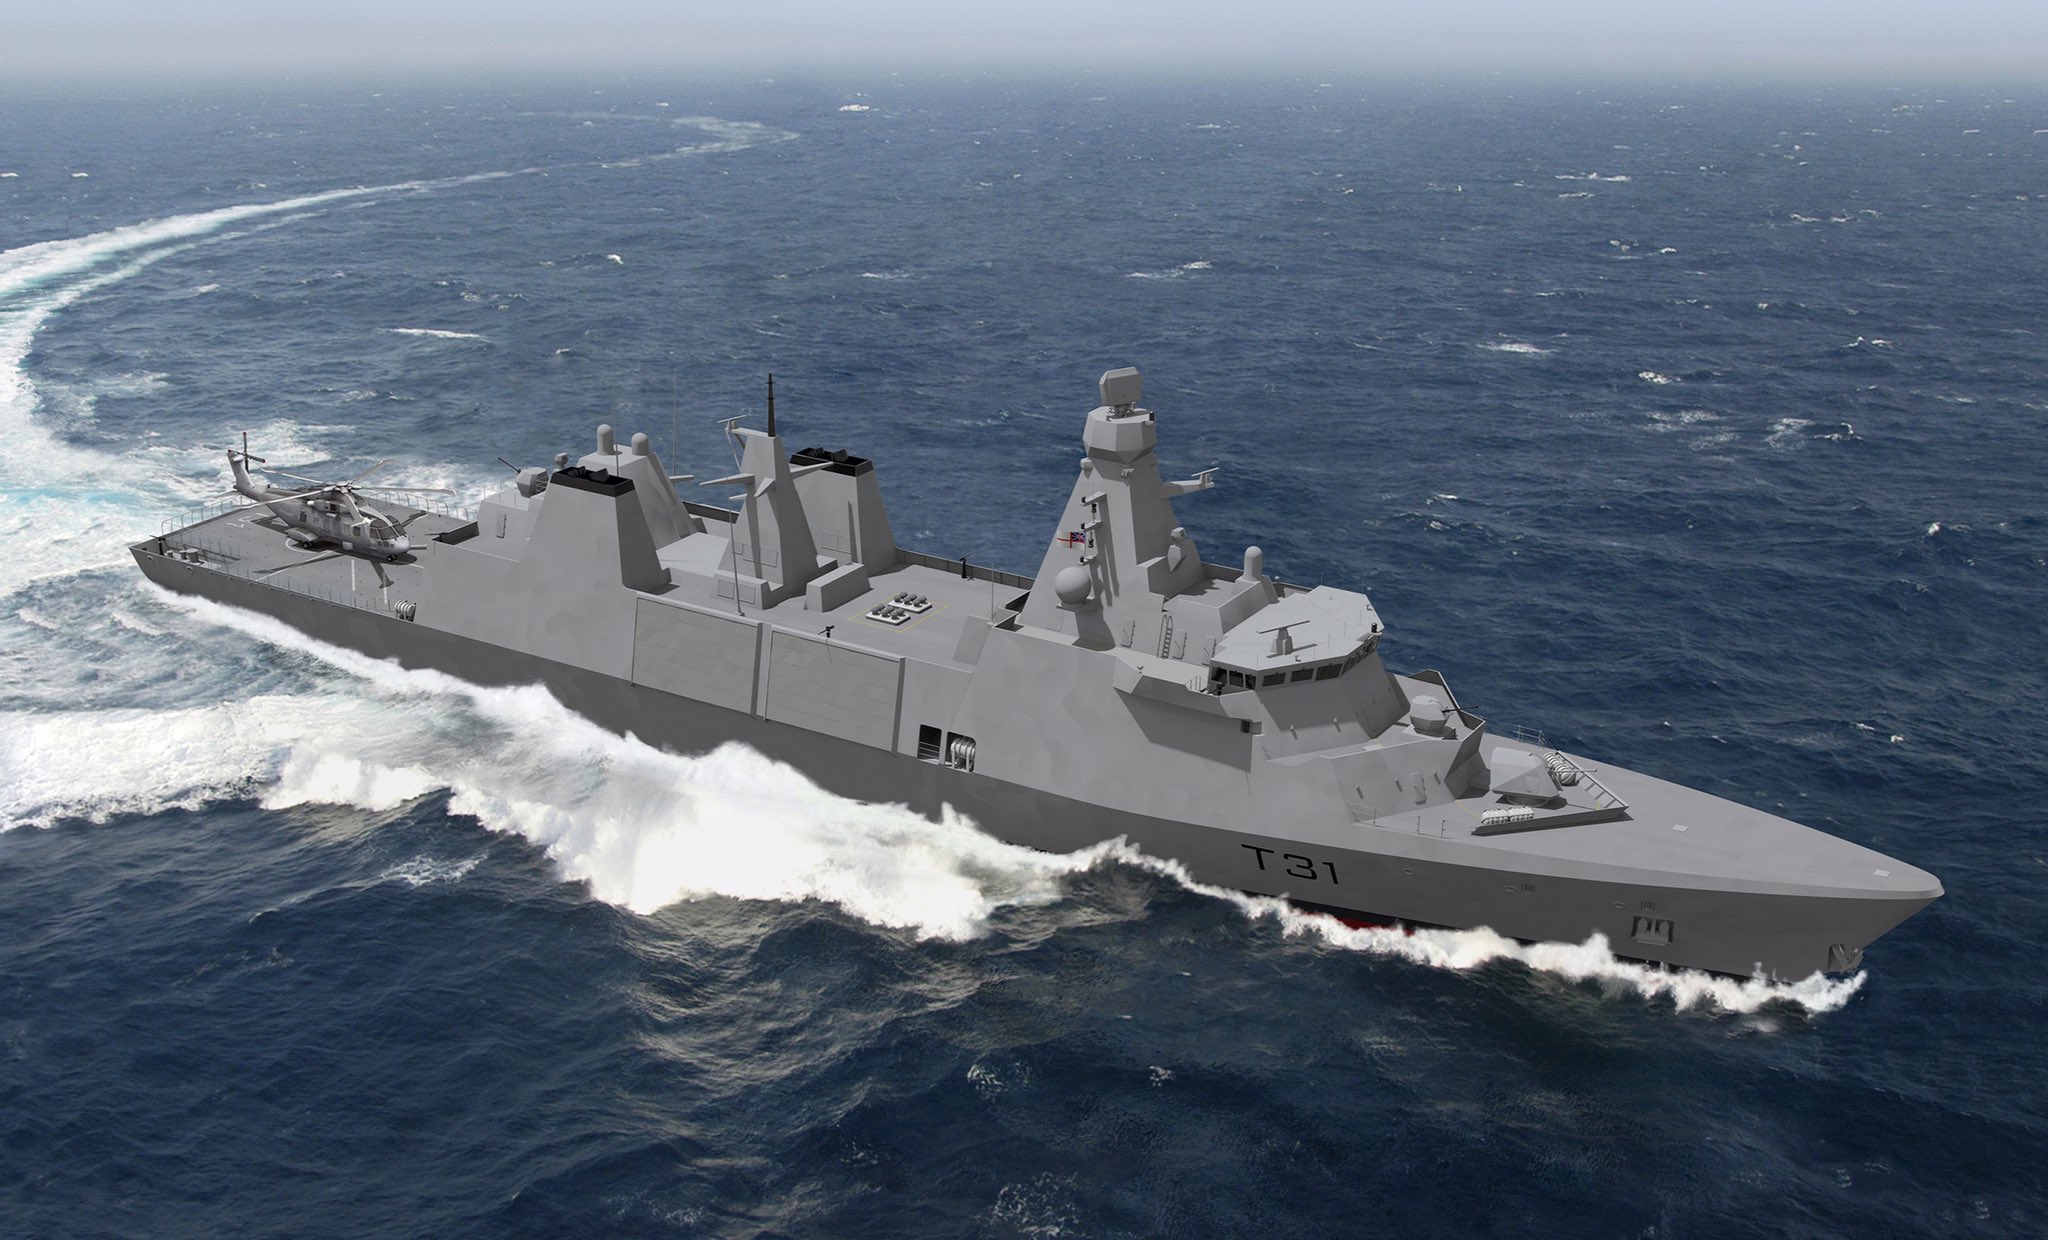 The Type 31 frigate, also known as the Inspiration class, and formerly known as the Type 31e frigate or General Purpose Frigate (GPF), is a class of five frigates being built for the United Kingdom's Royal Navy, with variants also being built for the Indonesian and Polish navies